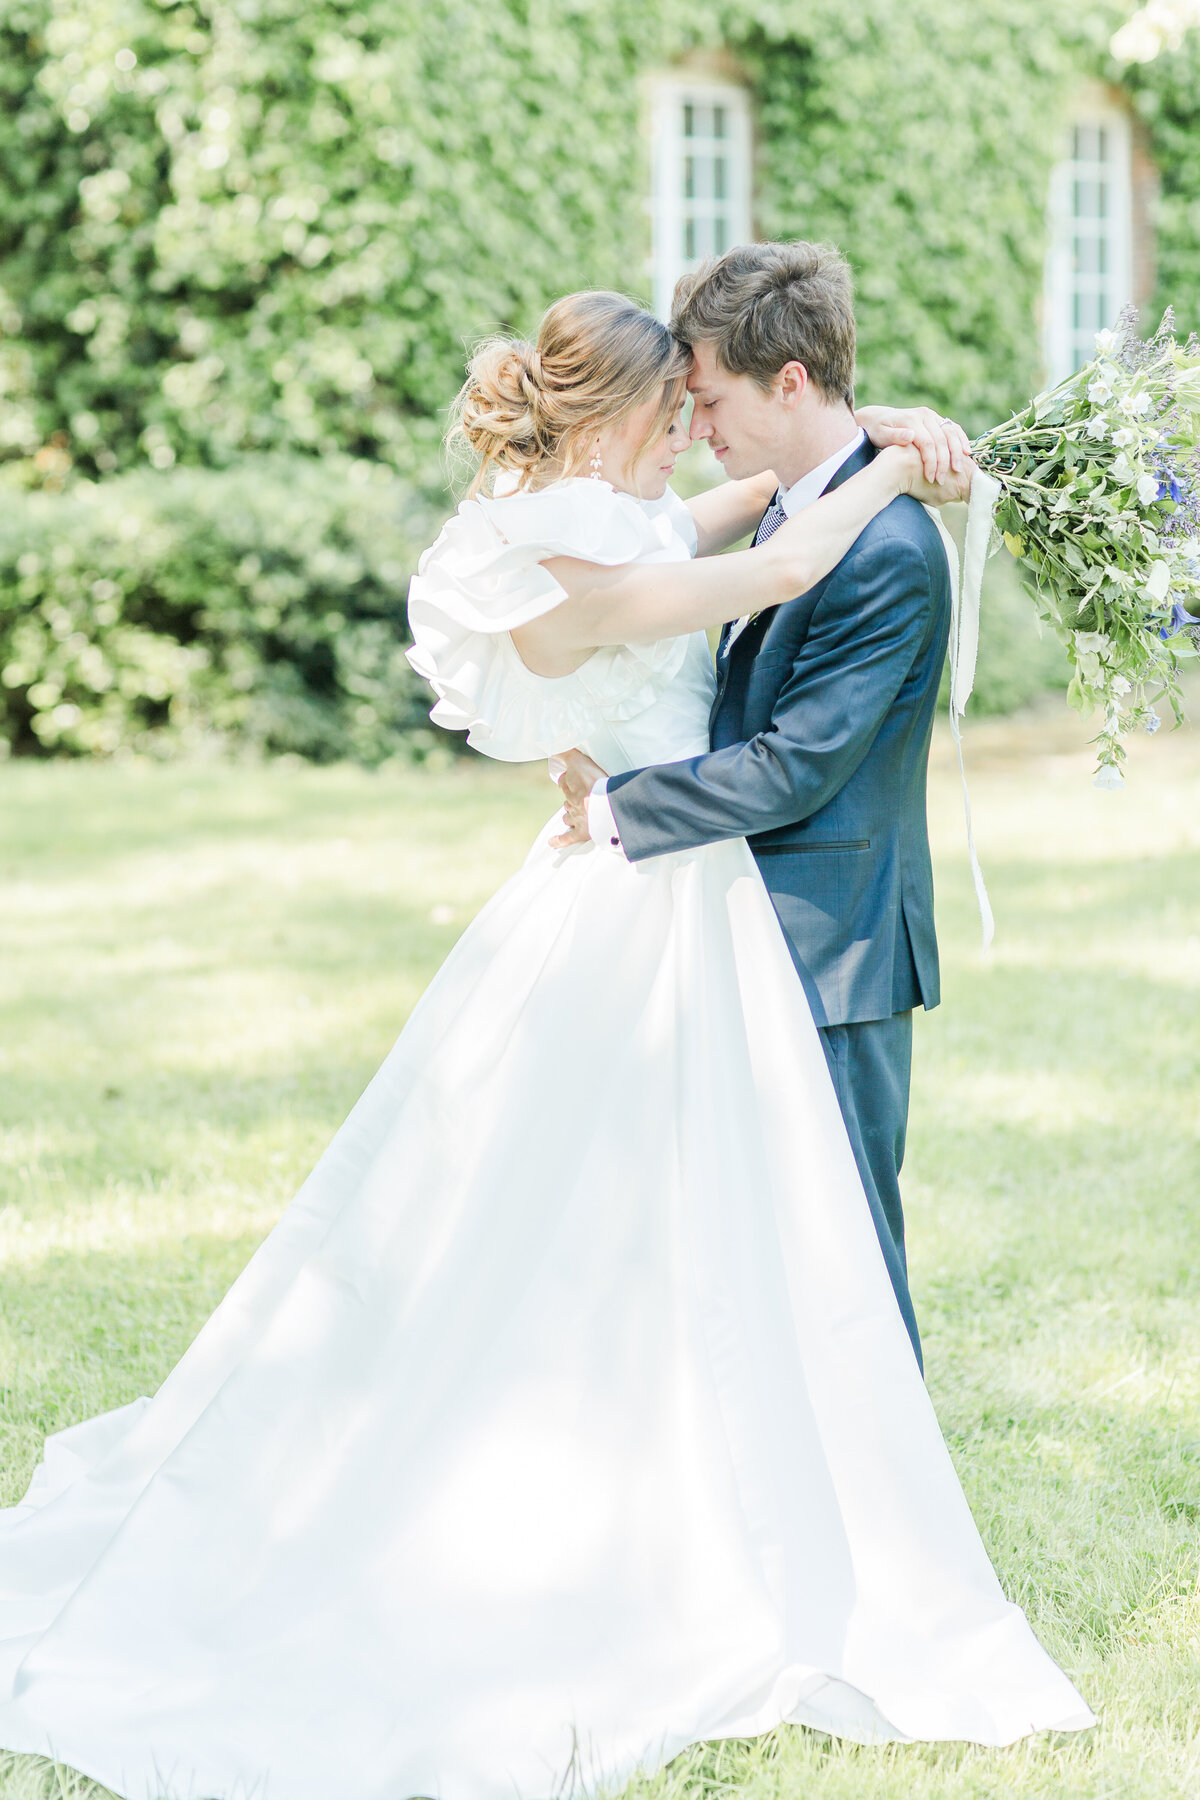 Bride and groom share a casual embrace. Their heads are touching, the bride's arm's draped around the groom's neck and the groom's arms holding the small of the bride's back. Their foreheads touching. Captured by North Shore Boston Wedding photographer Lia Rose Weddings